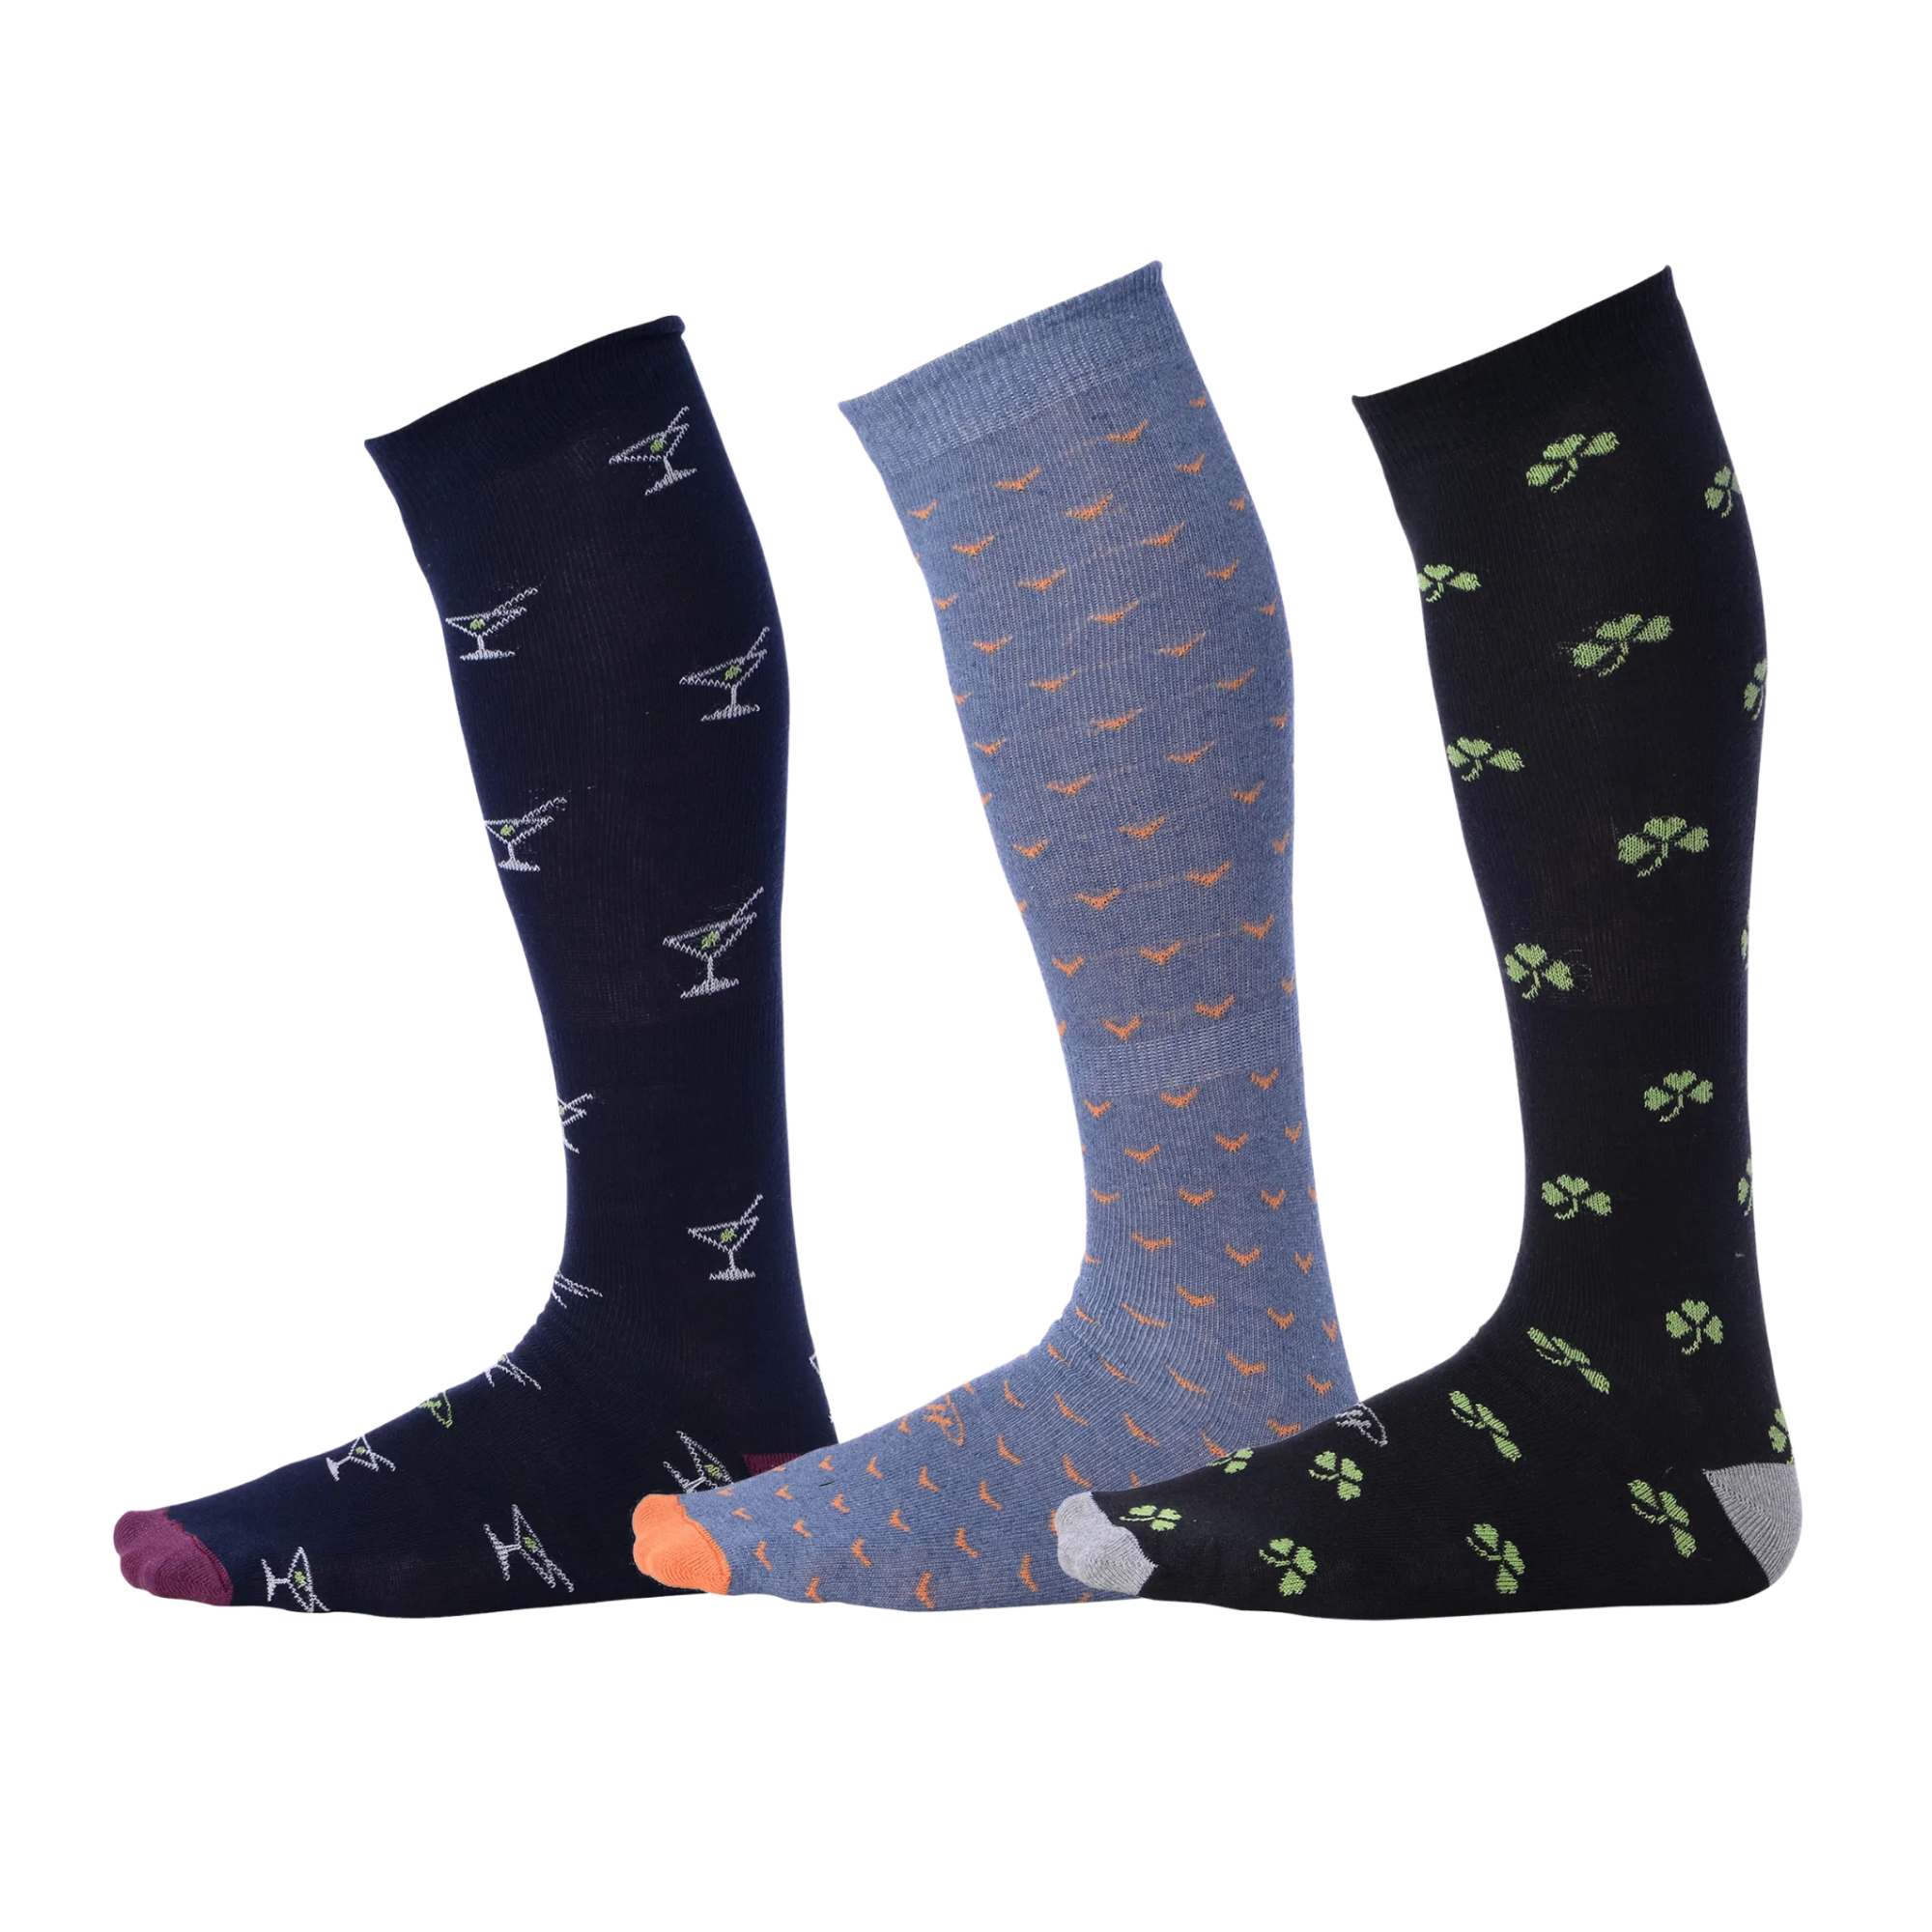 navy blue dress socks with cocktail prints, blue dress socks with orange birds, black dress socks with clover prints